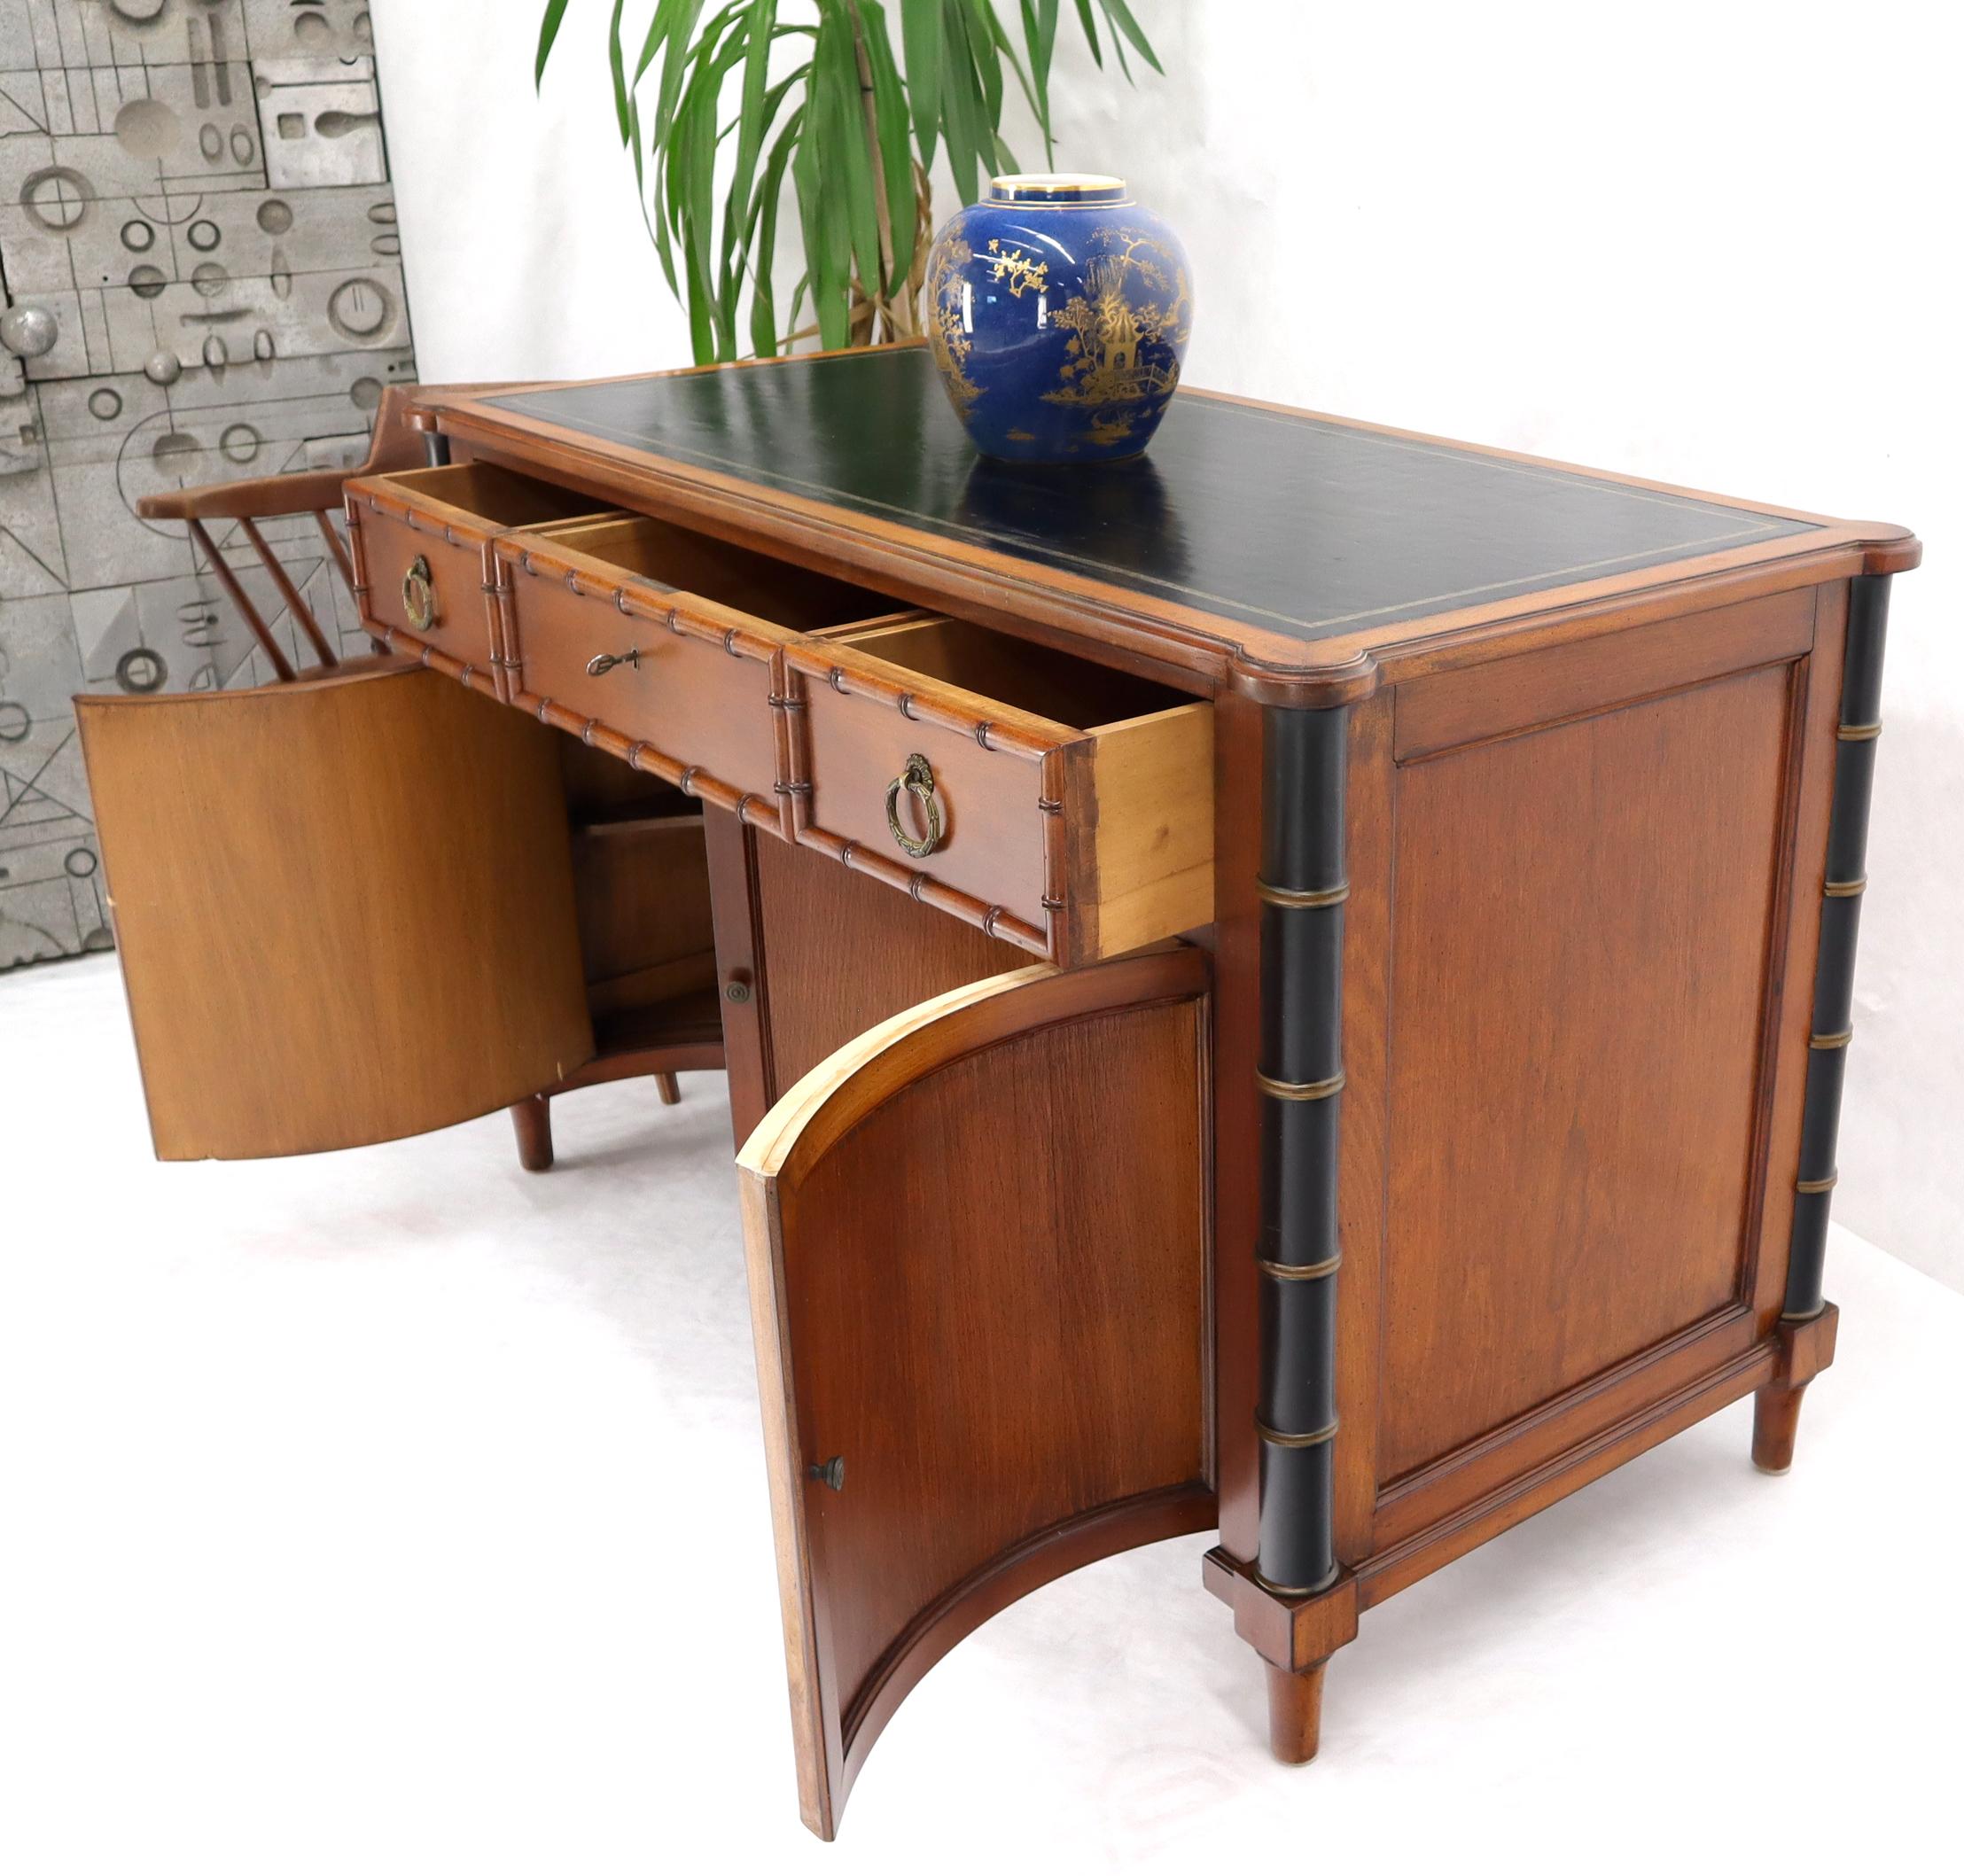 Faux Bamboo Black Leather Top Mahogany Desk with Curved Bottom Doors Compartment In Good Condition For Sale In Rockaway, NJ